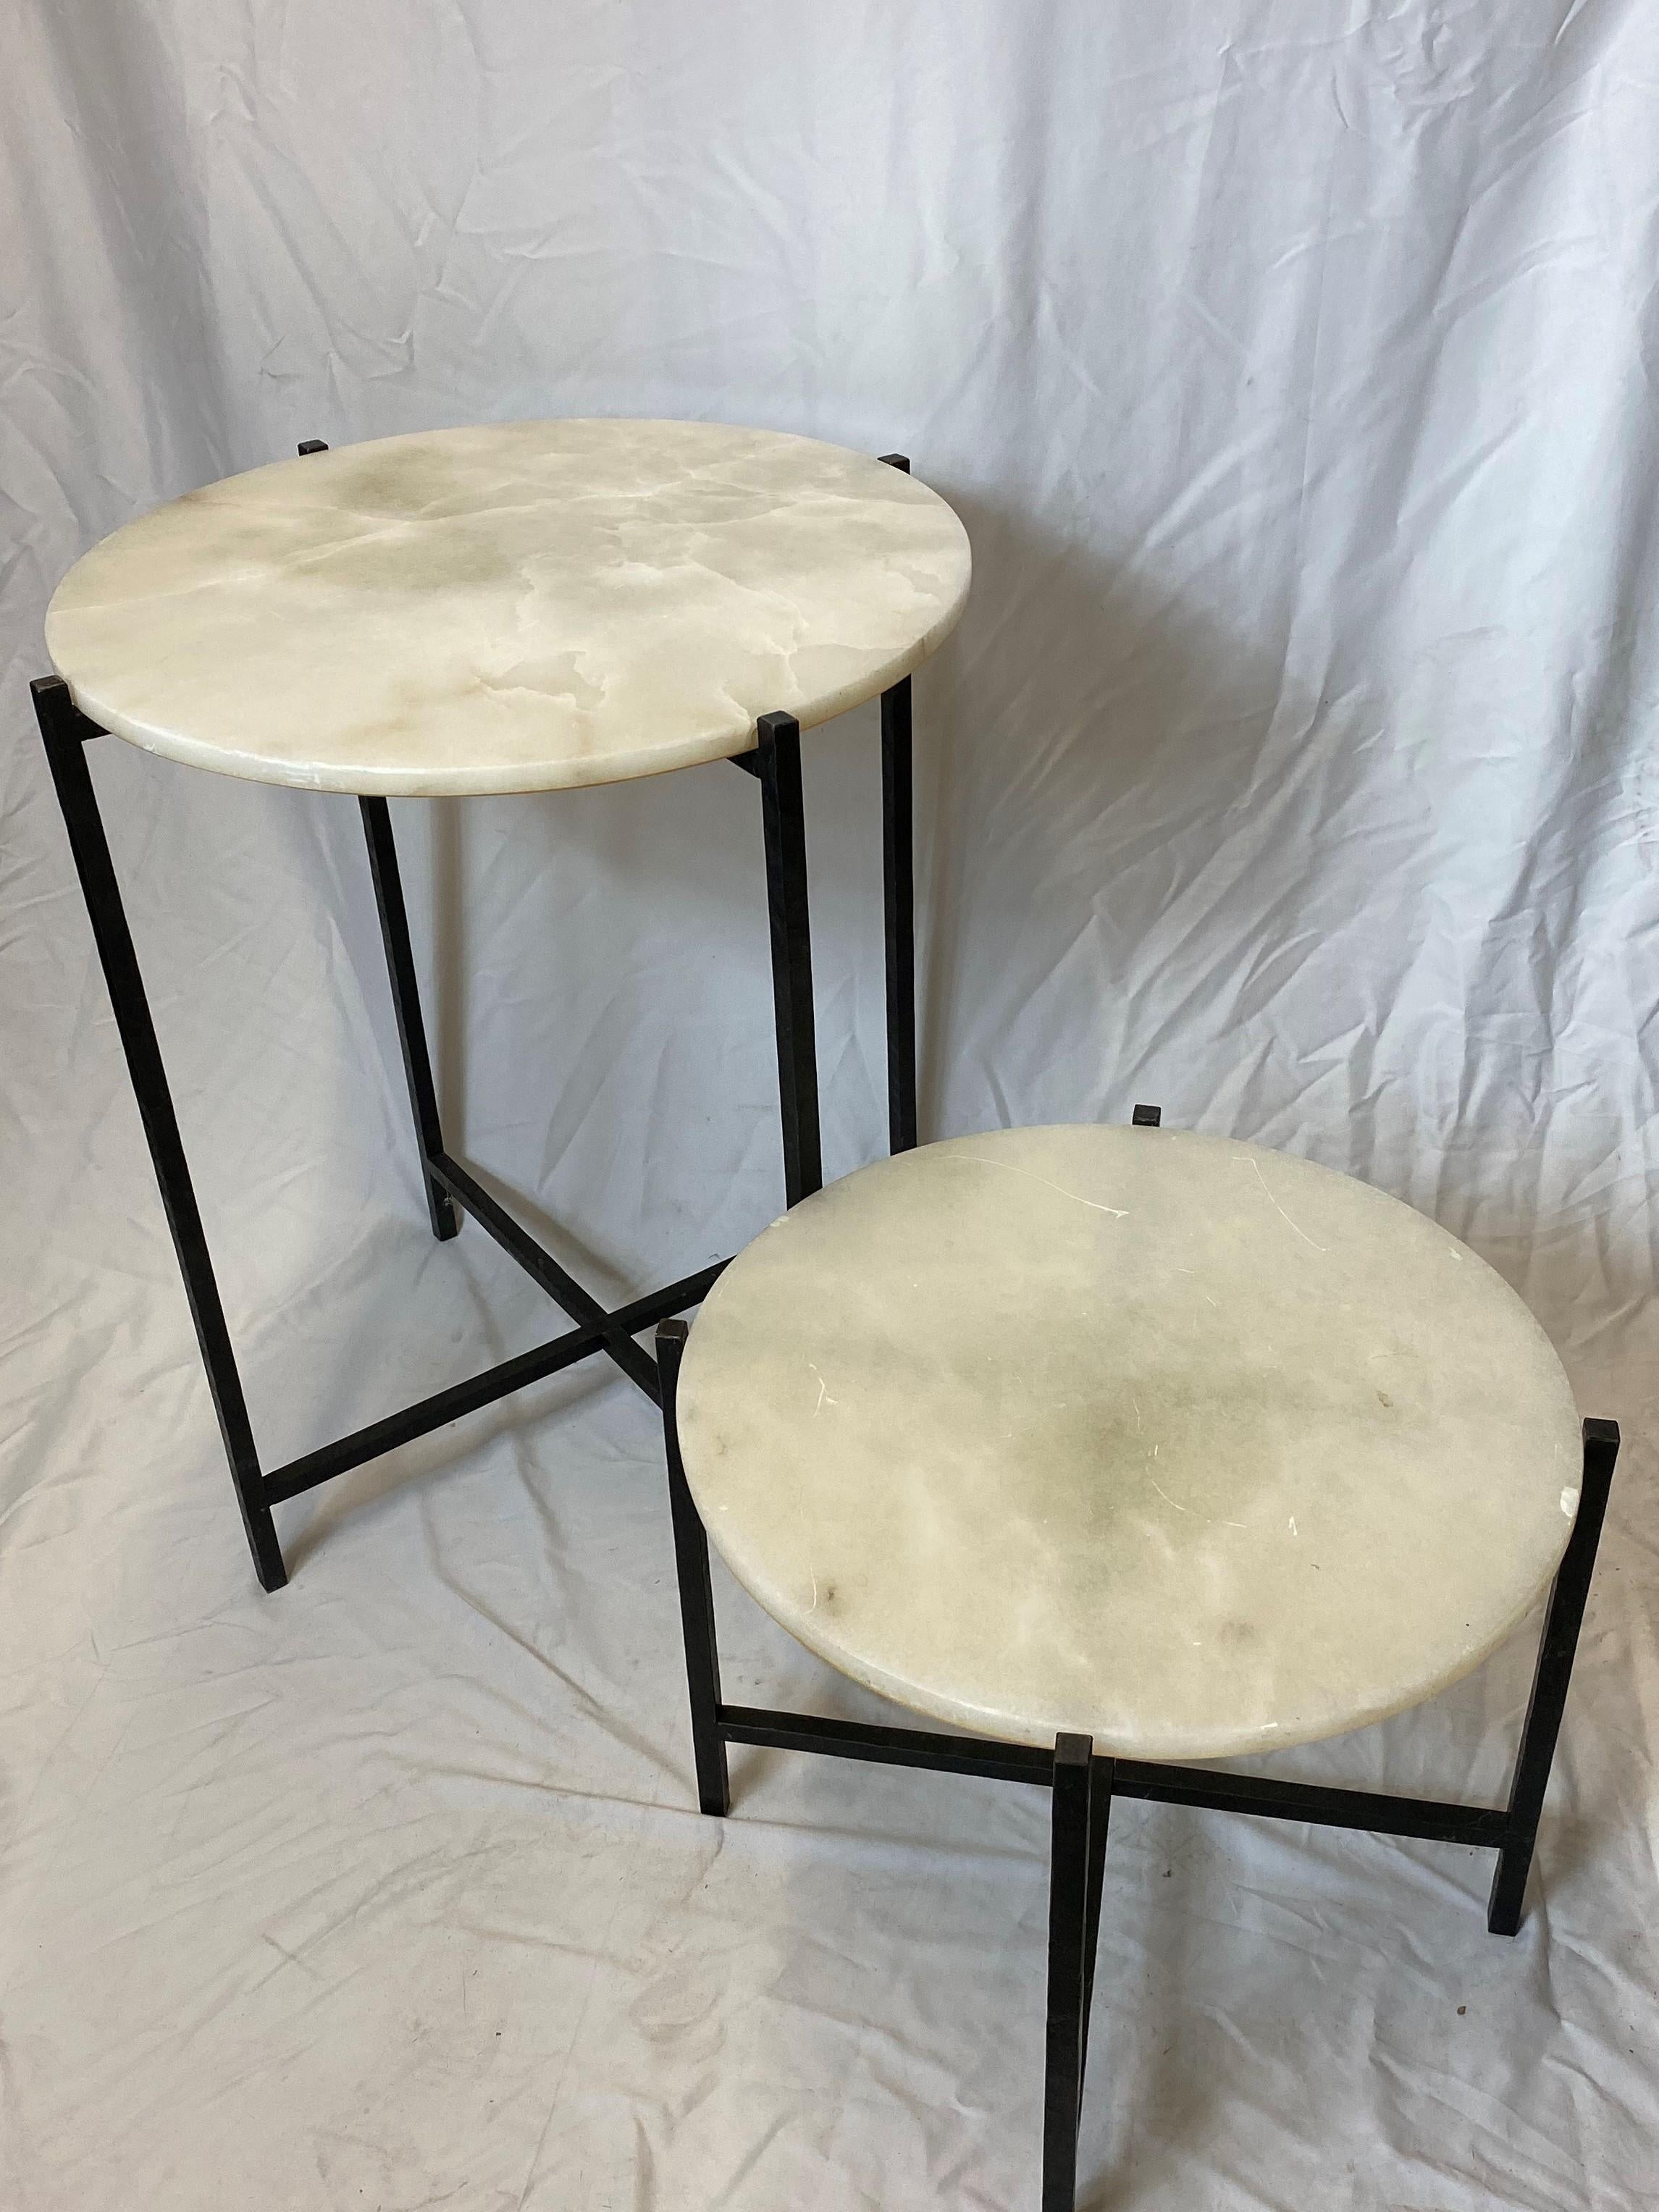 Maison Baguès alabaster table set- 2 sizes, handmade wrought iron and alabaster tops, made in France.